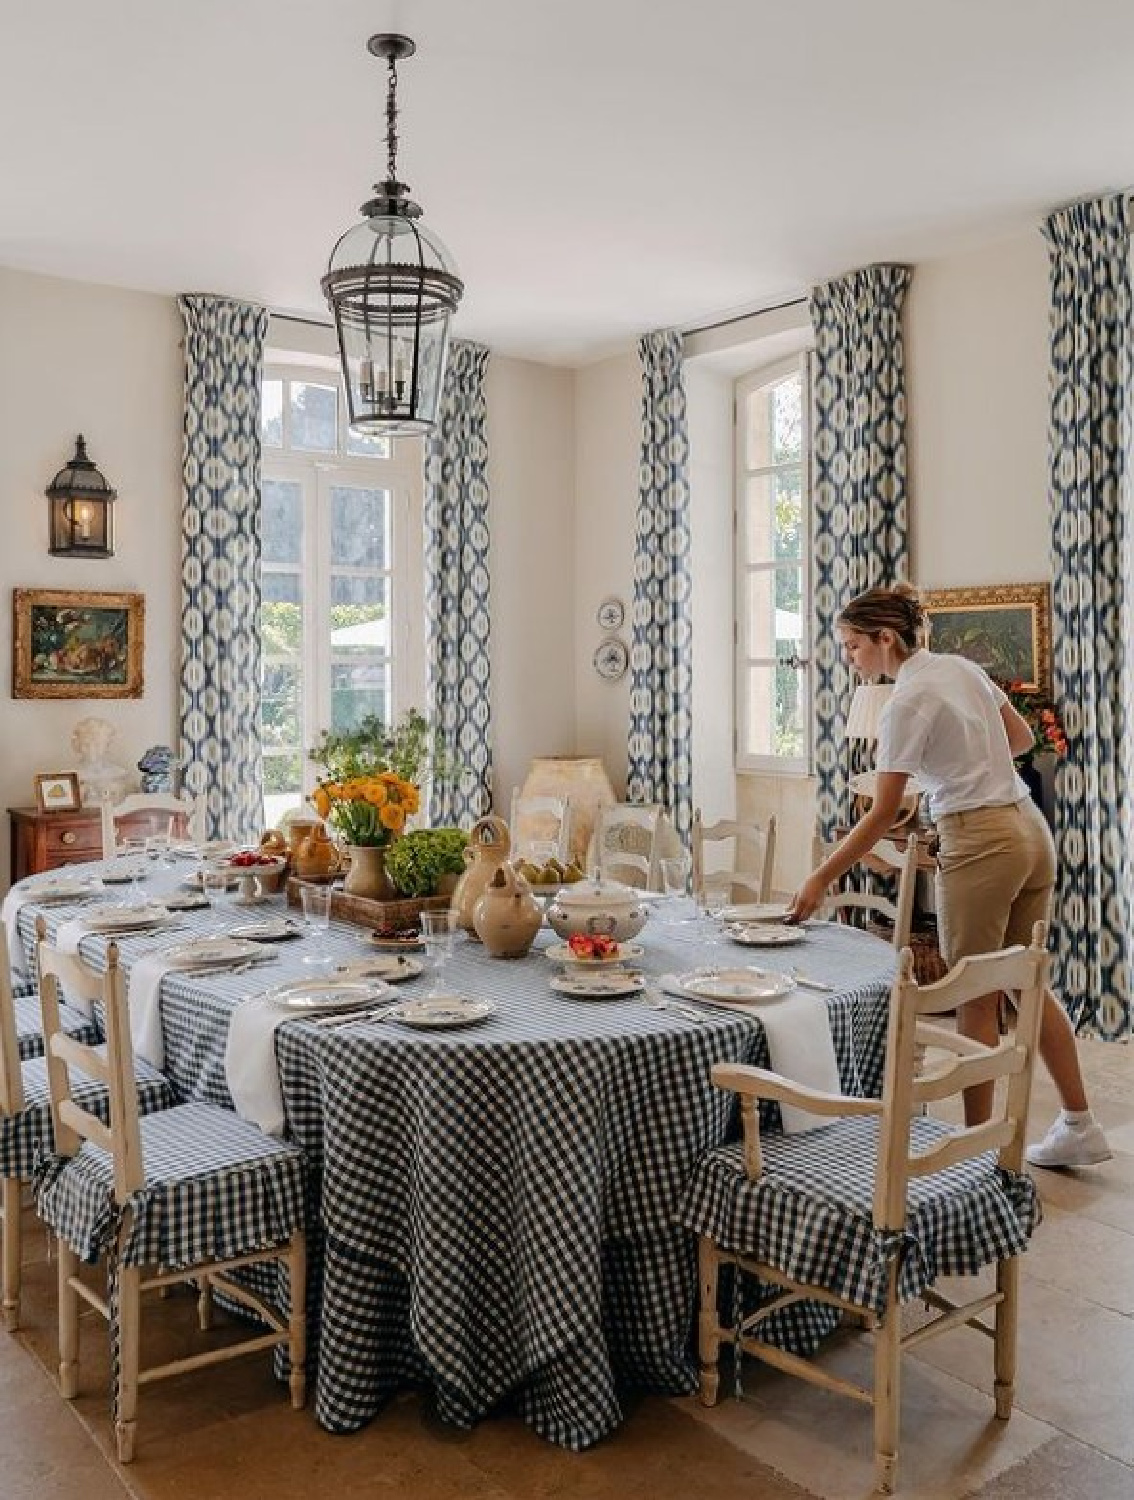 French country dining room with blue and white checks - inside Le Mas des Poiriers, a Rhone Valley renovated farmhouse. @provencepoiriers photo: @angelinalzi